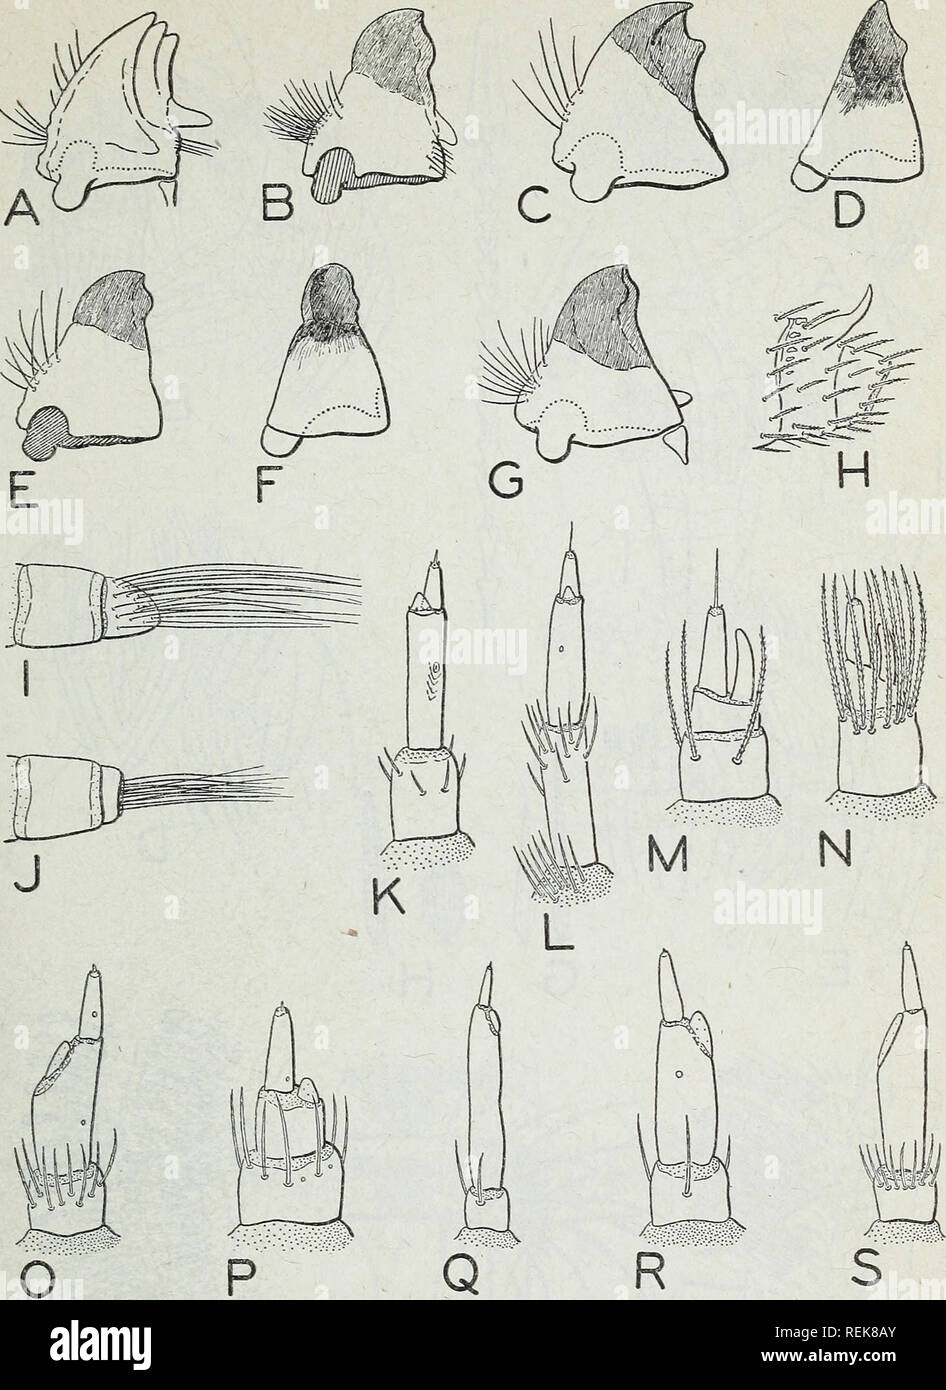 . Classification of the Dermestidae (larder, hide, and carpet beetles) based on larval characters : with a key to the North American genera. Dermestidae; Beetles. CLASSIFICATION OF THE DERMESTIDAE 15-. Figure 2.—Anatomical details of dermestid larvae: A, right mandible of Der- mestes vulpinus, ventral view; B, left mandible of Attagenus picens, dorsal view; C and D, right mandible of Apsectus hispidus, ventral and buccal views, respectively; E, left mandible of Tliylodrias contractus, dorsal view; F, right mandible of T. contractus, buccal view; G, right mandible of Trogoderma versicolor, vent Stock Photo